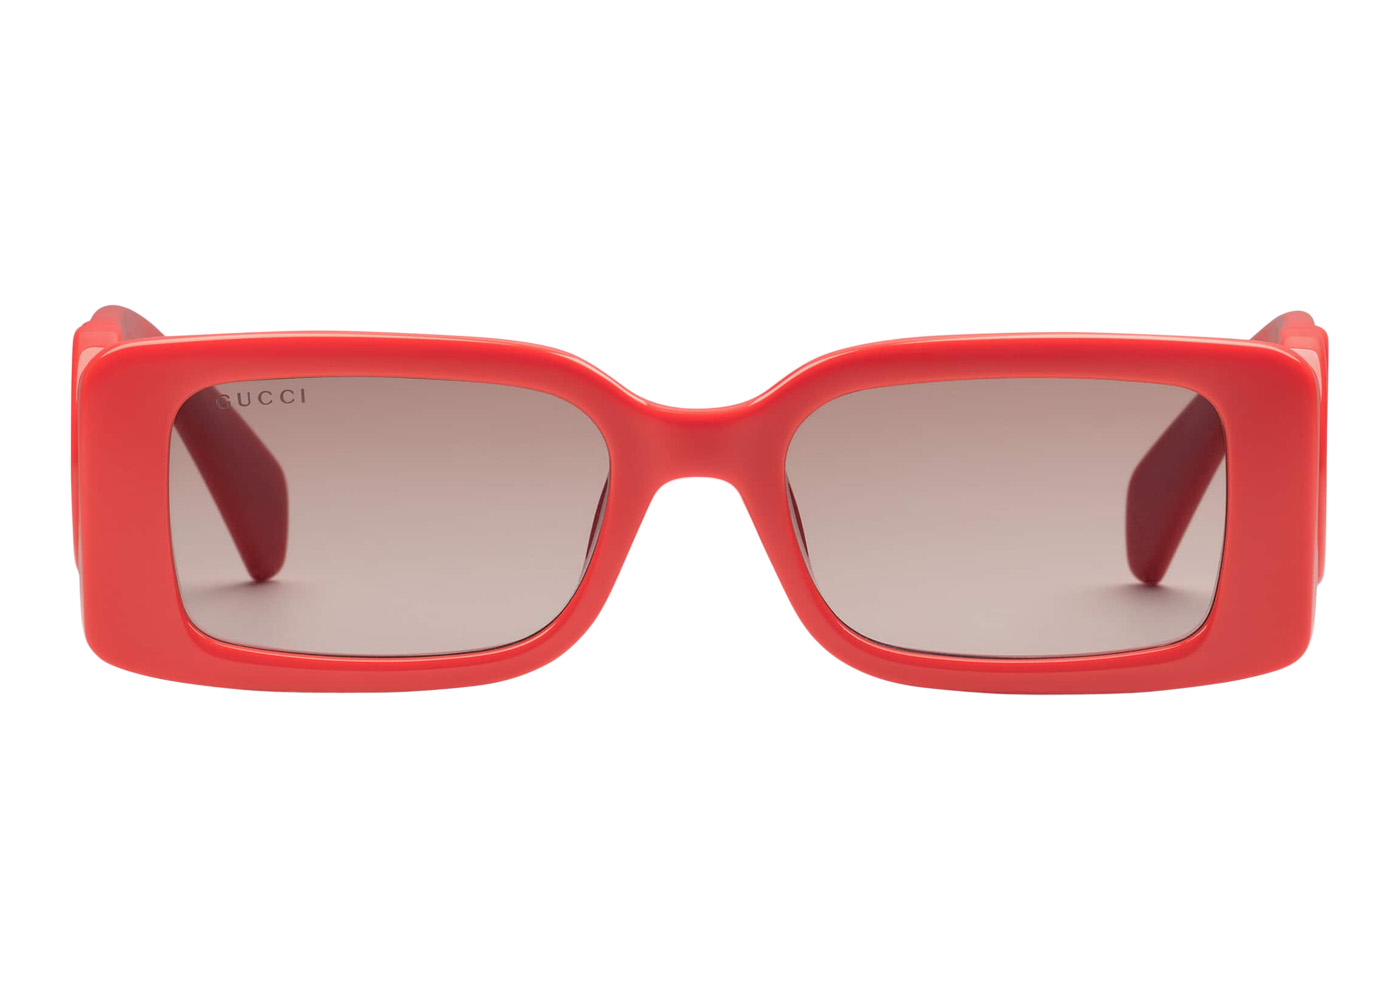 Gucci Rectangular Frame Sunglasses with Cut-Out Interlocking G Shiny  Red/Gradient Brown Lens (733369 J1691 6523)